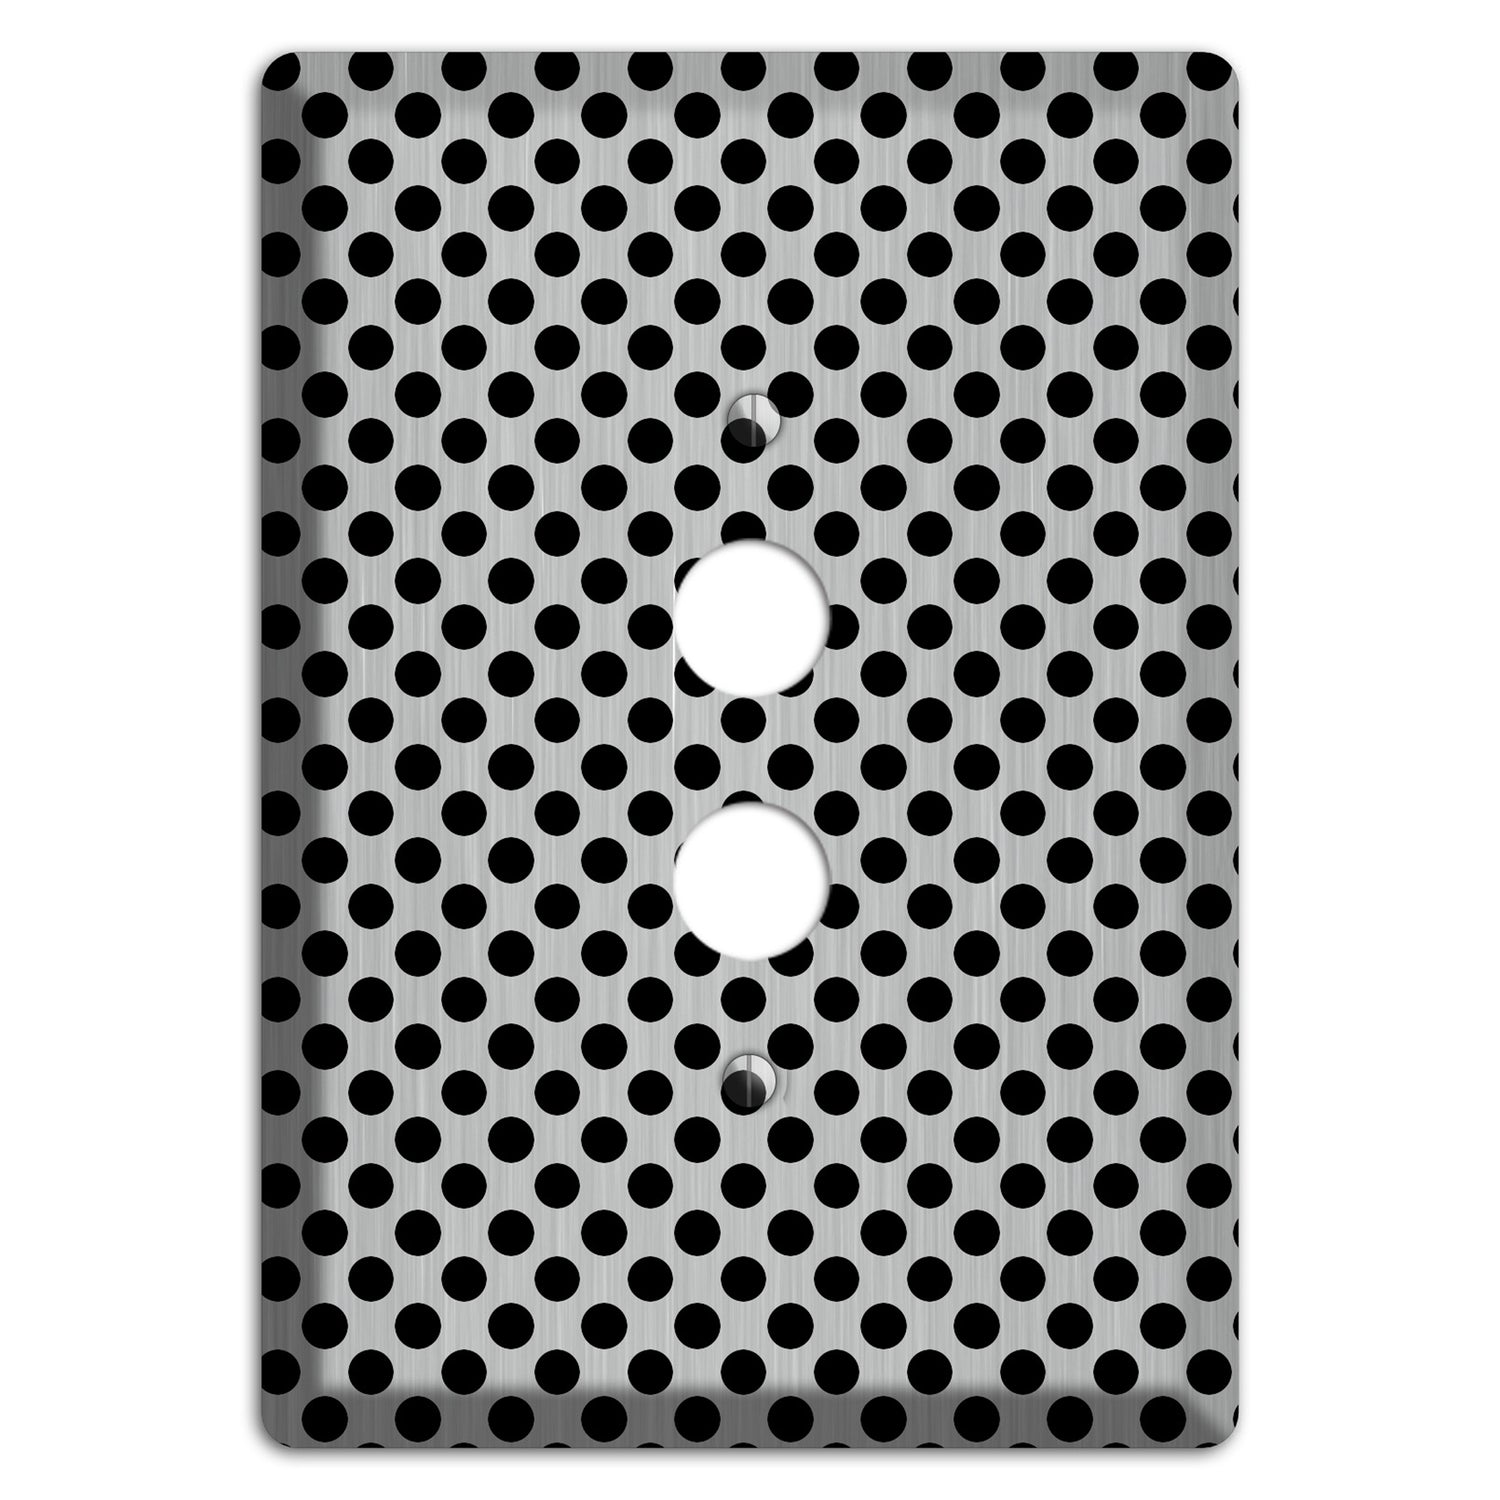 Packed Small Polka Dots Stainless 1 Pushbutton Wallplate